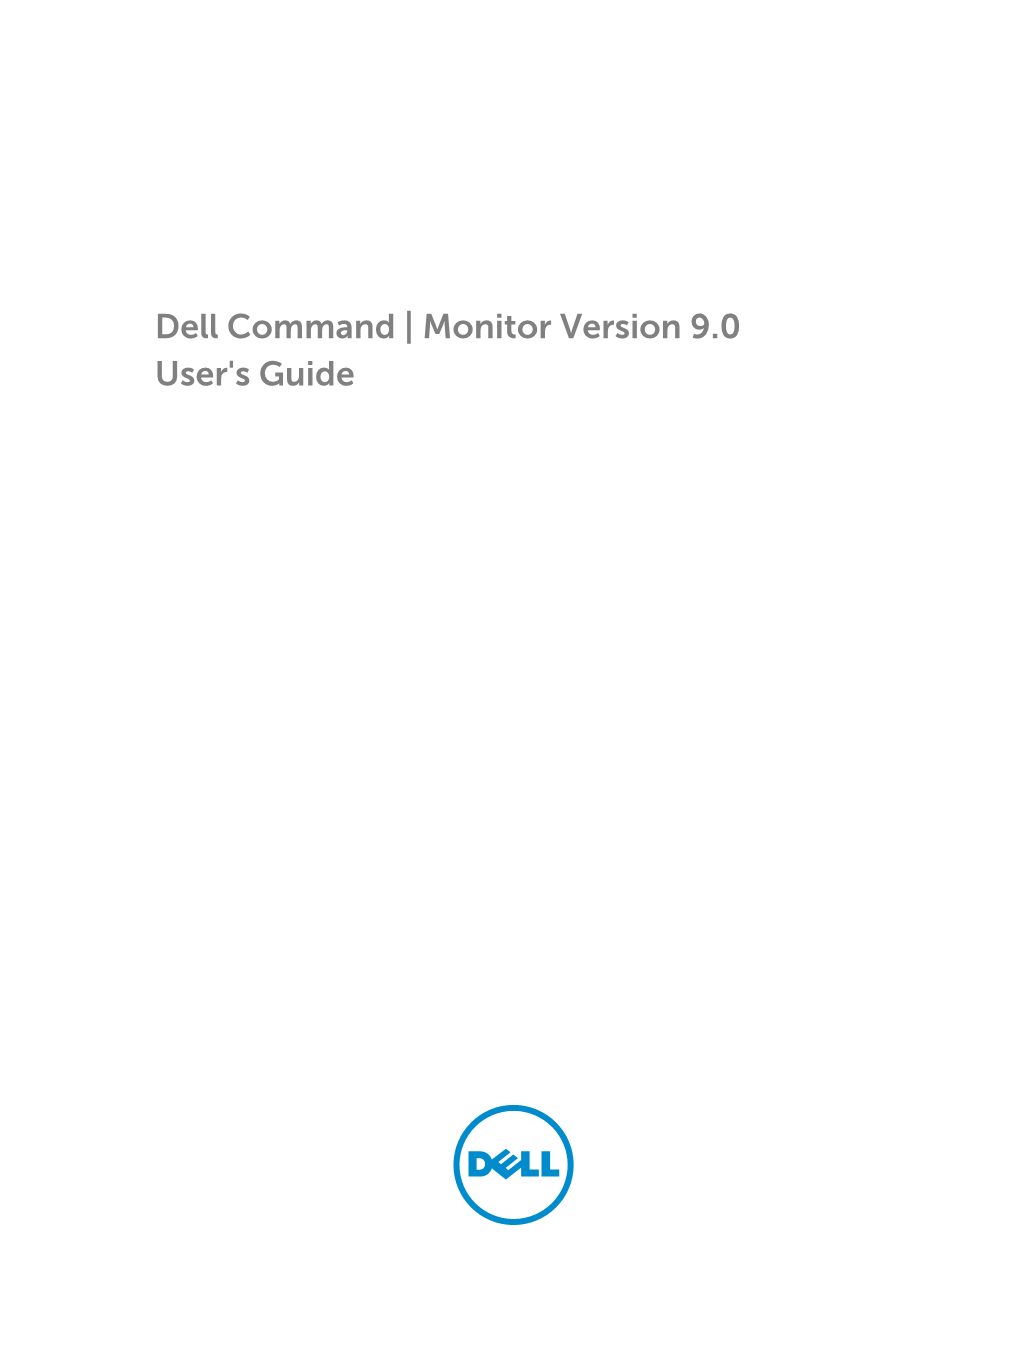 Dell Command | Monitor Version 9.0 User's Guide Notes, Cautions, and Warnings